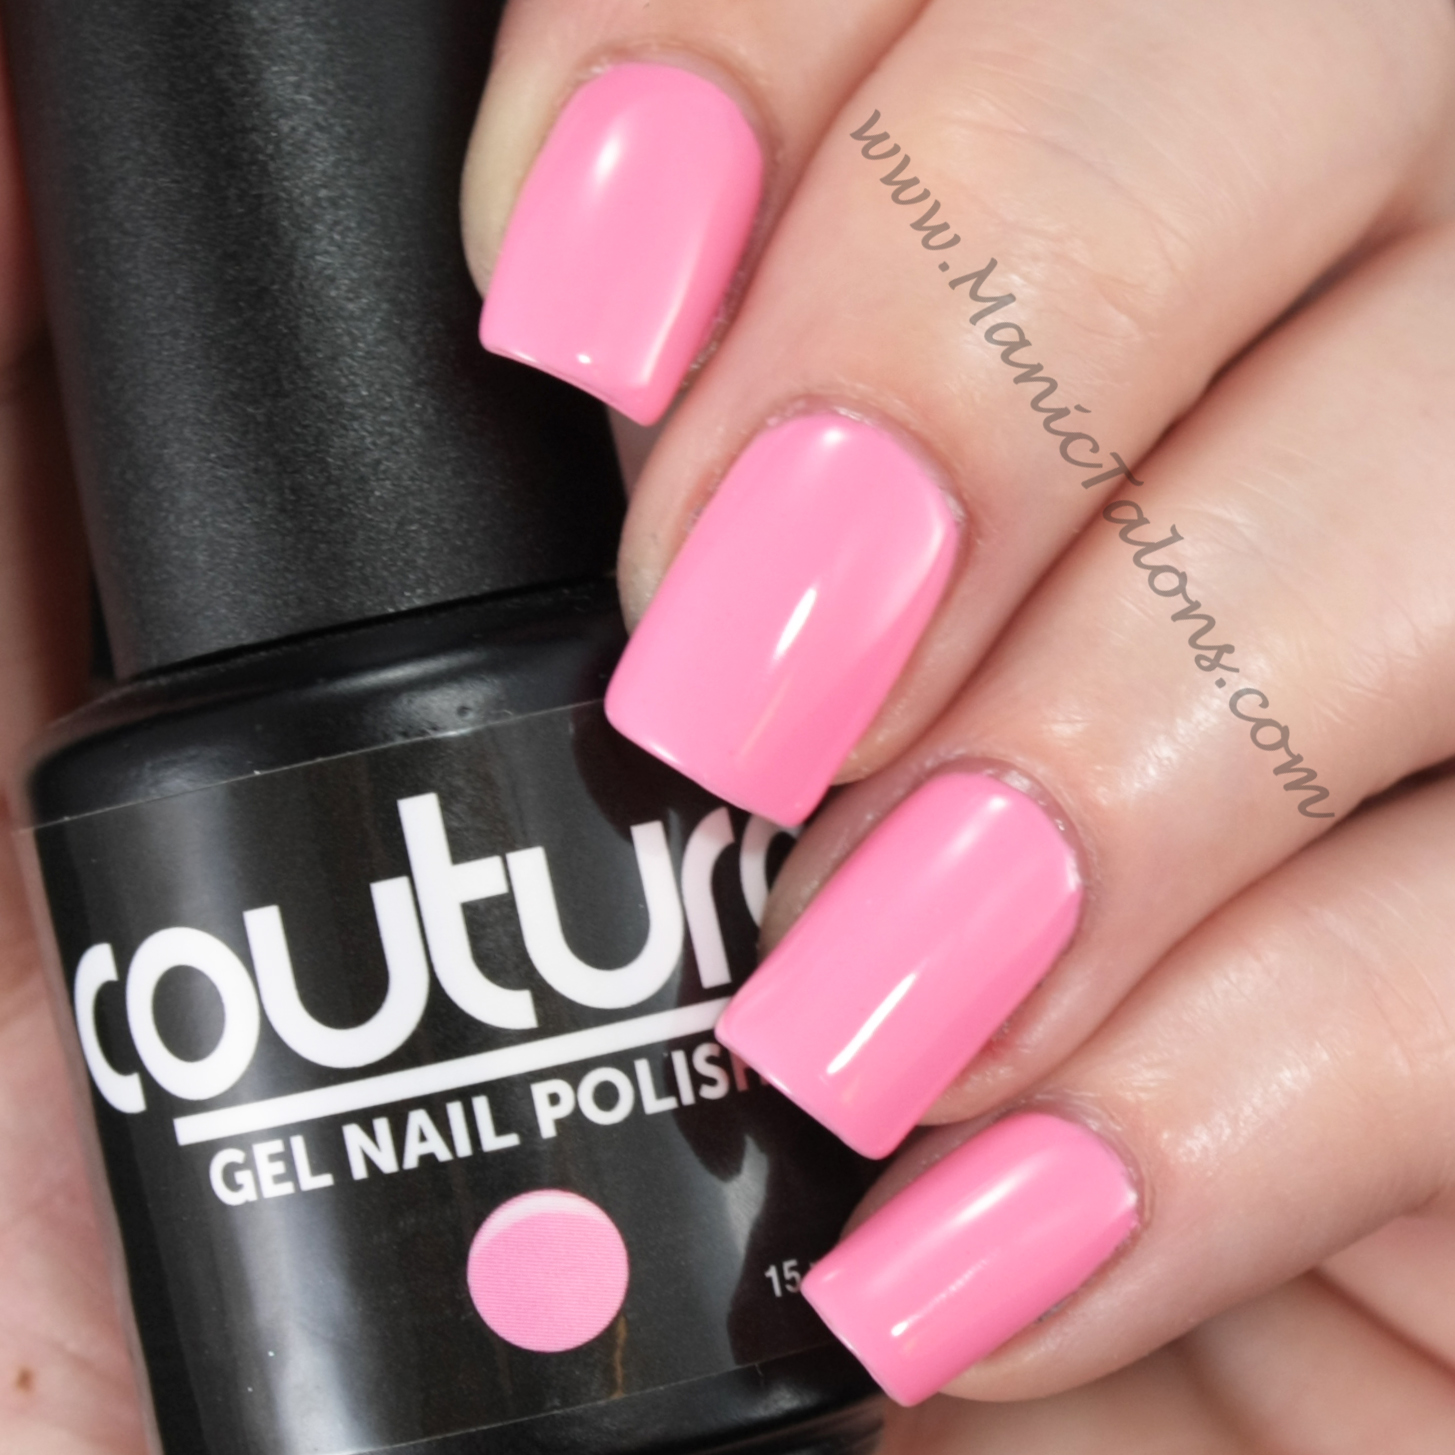 Couture Gel Nail Polish Off the Shoulder Swatch